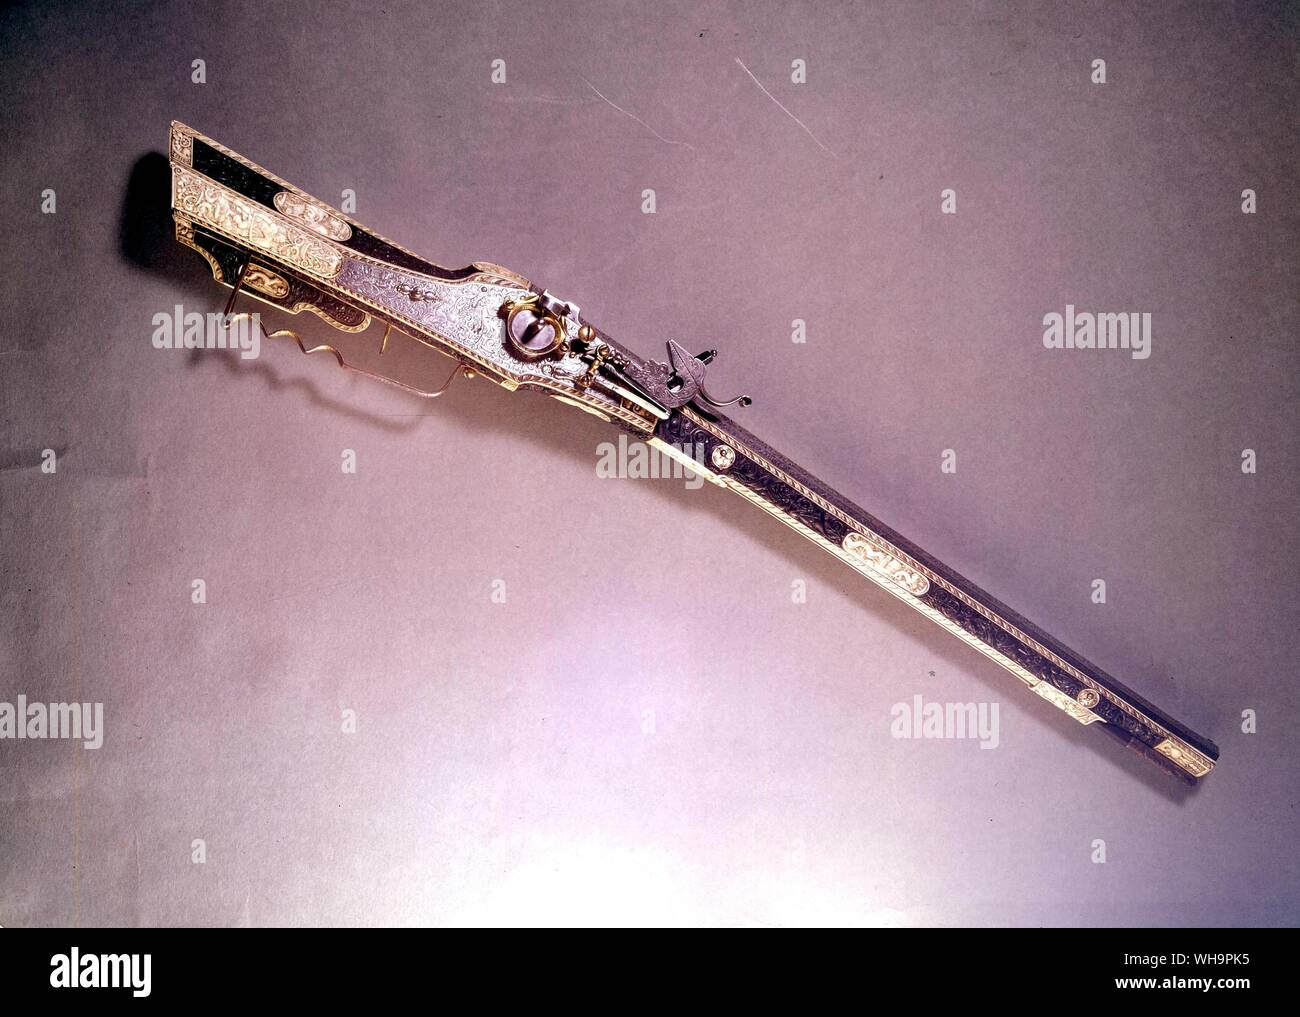 Wheel lock Rifle ornamented over its whole surface. The barrel and lock plate are engraved with the Virtues and figures emblematic of abundance amidst floral scrolls while the stock is veneered with carved ebony enclosing panels of carved staghorns Stock Photo